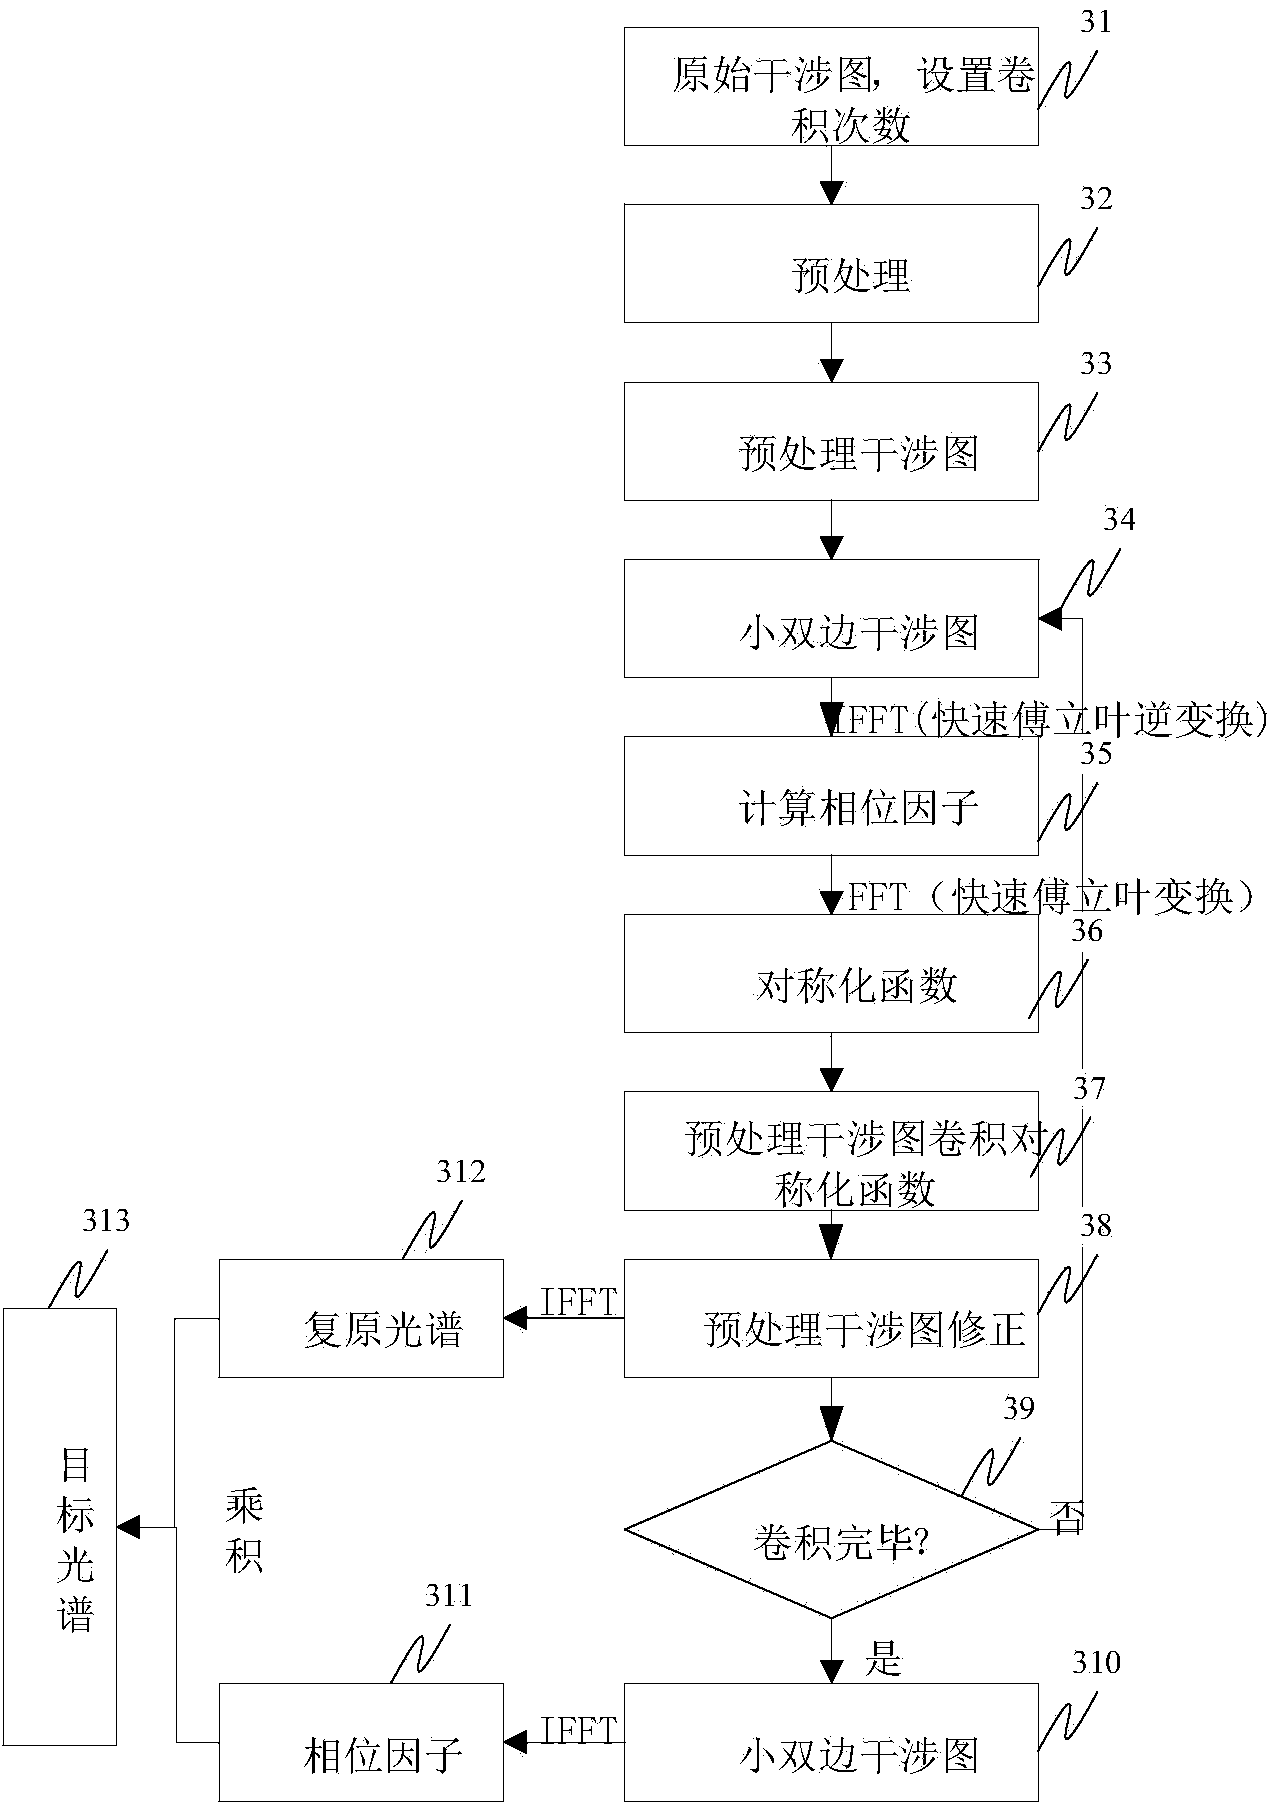 Method and device for correcting phase errors of interference spectrum imaging instrument